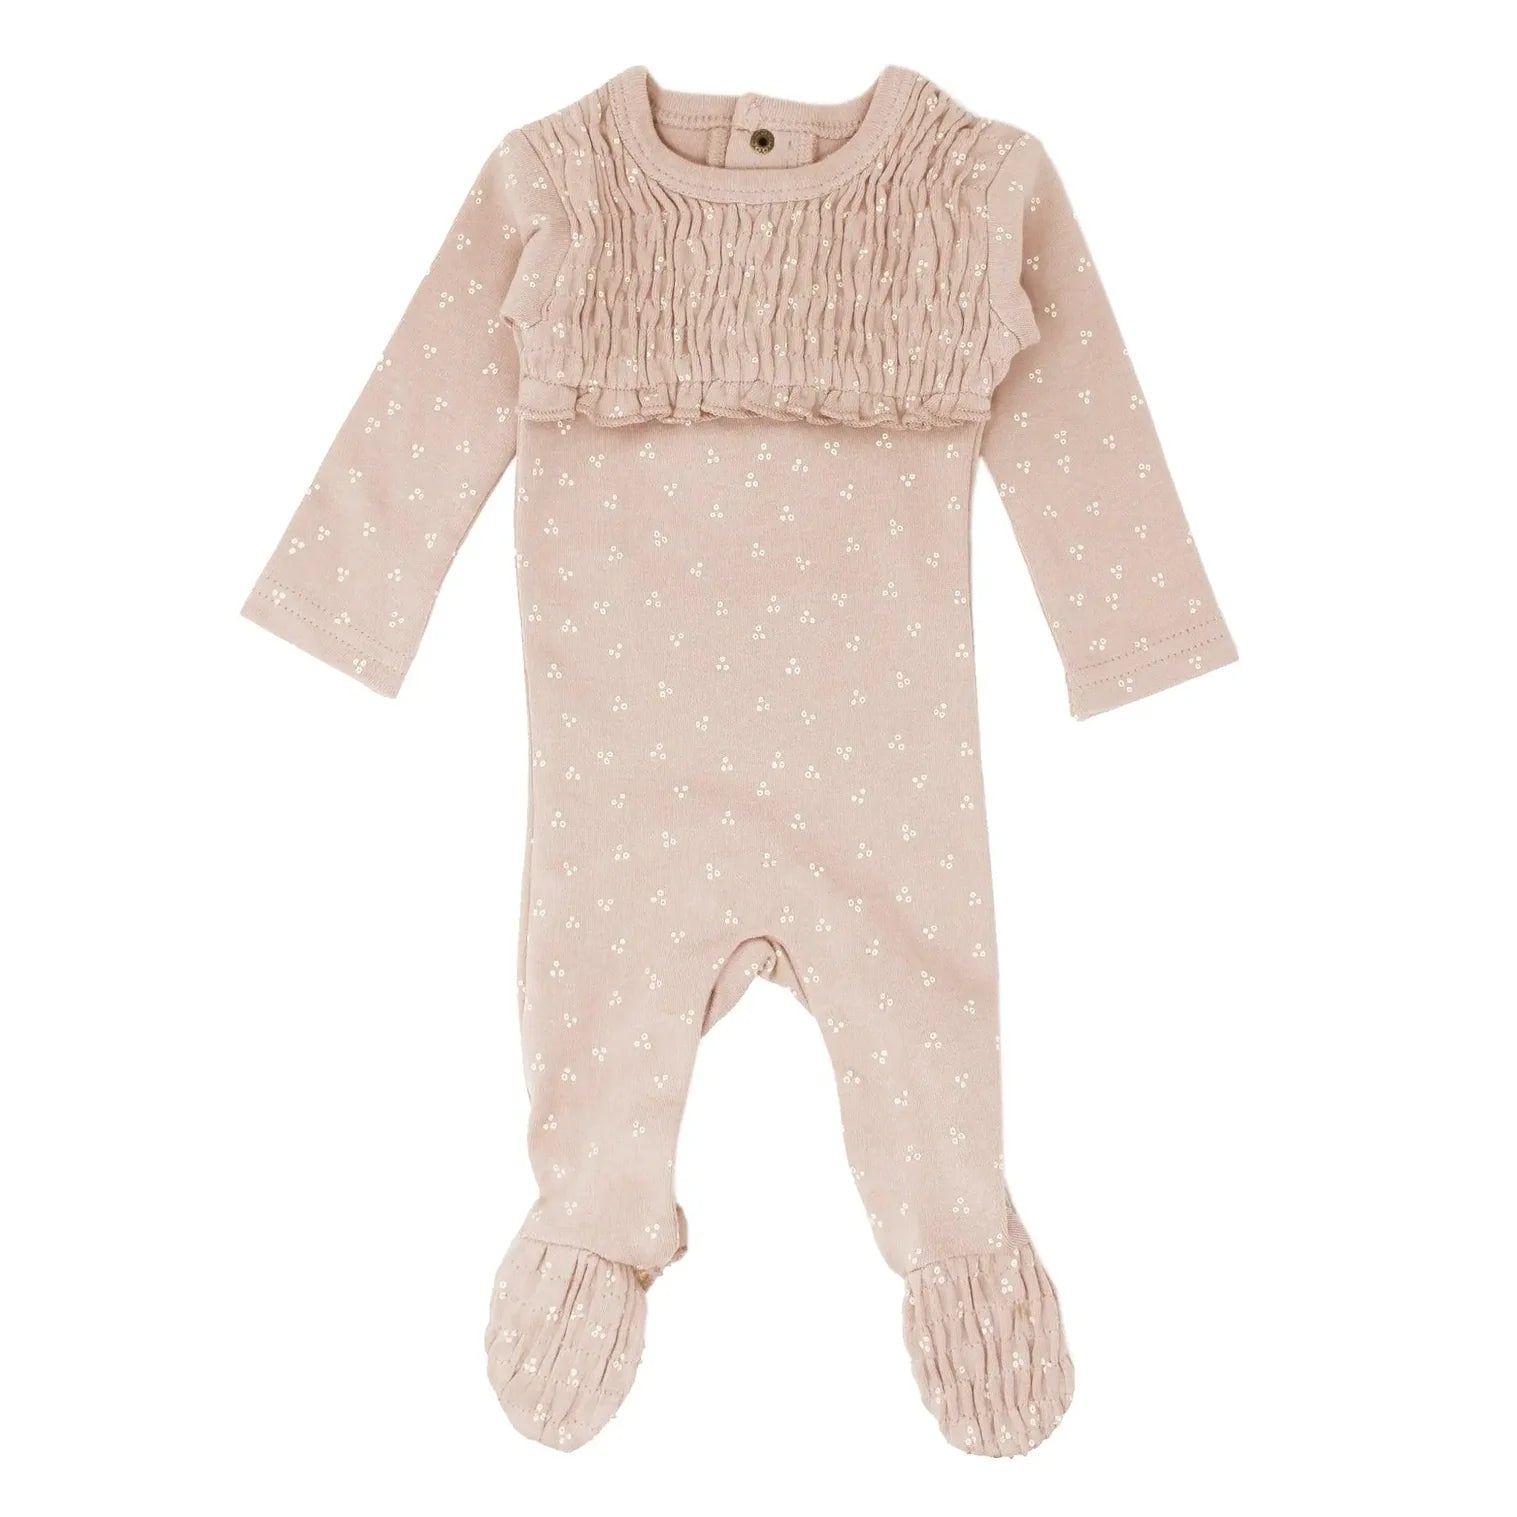 L’ovedbaby Organic Smocked Footie in Rosewater Dots 6-9m